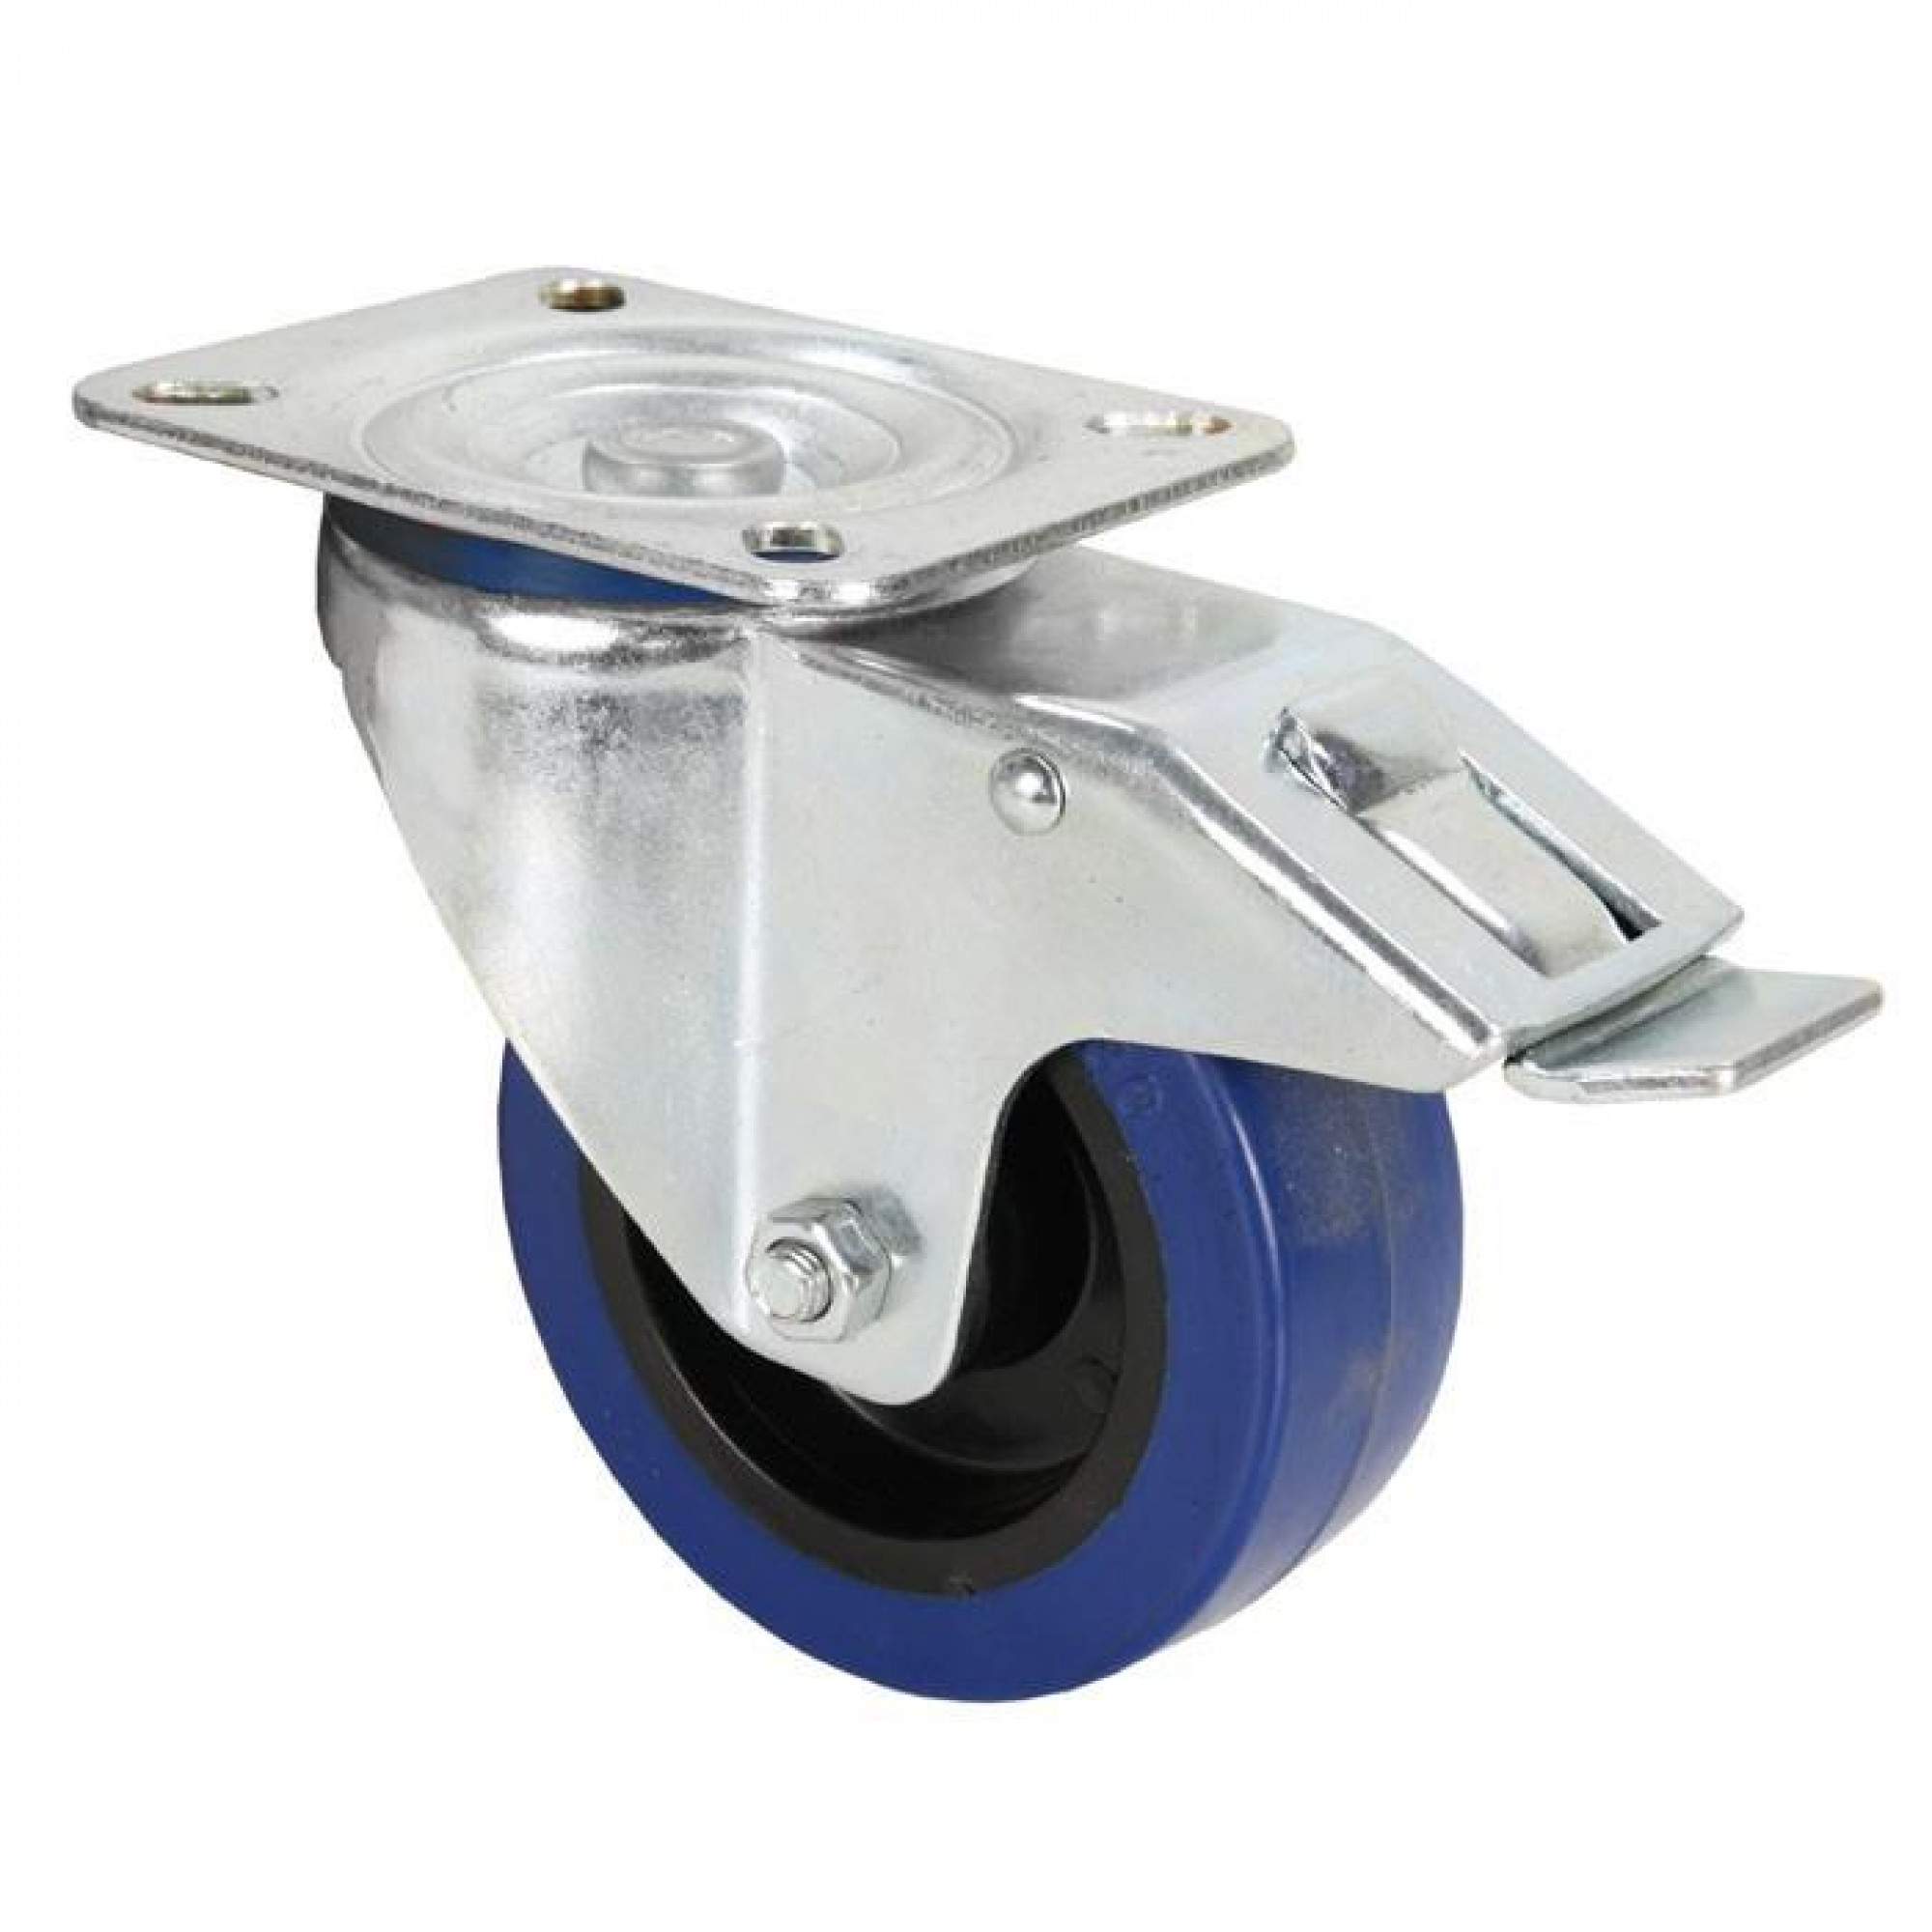 ADAM HALL Hardware 372191 100 mm, with blue wheel and brake